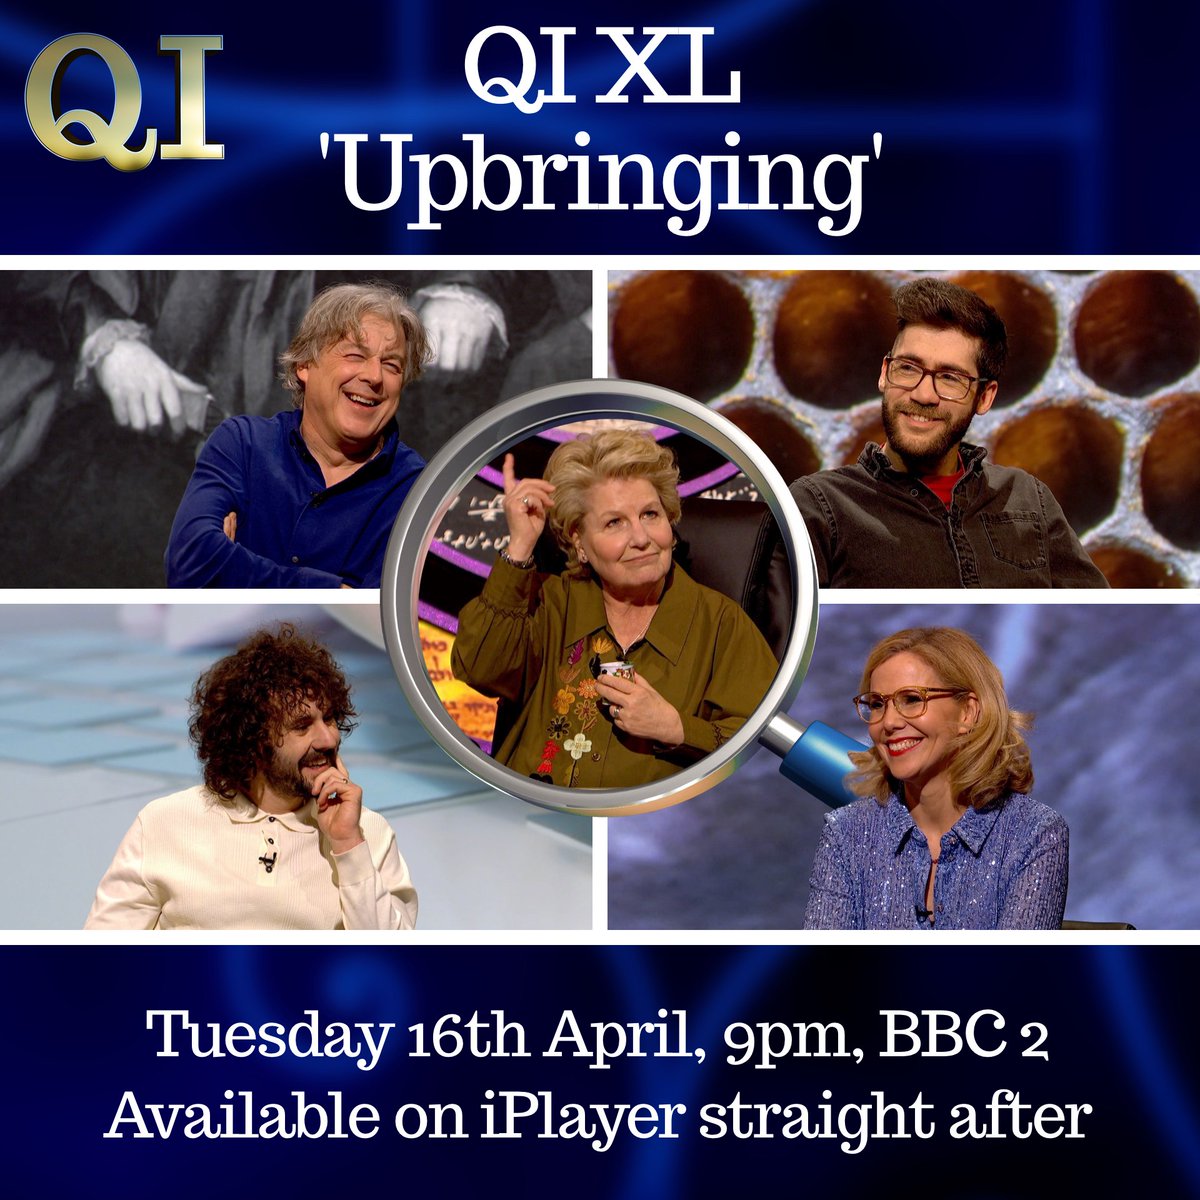 This is tonight! With the awesome trio of @alandaviescomic @JoshPughComic and @sallyephillips and not to forget the best hugger in TV @sanditoksvig. 9pm and then iPlayer x